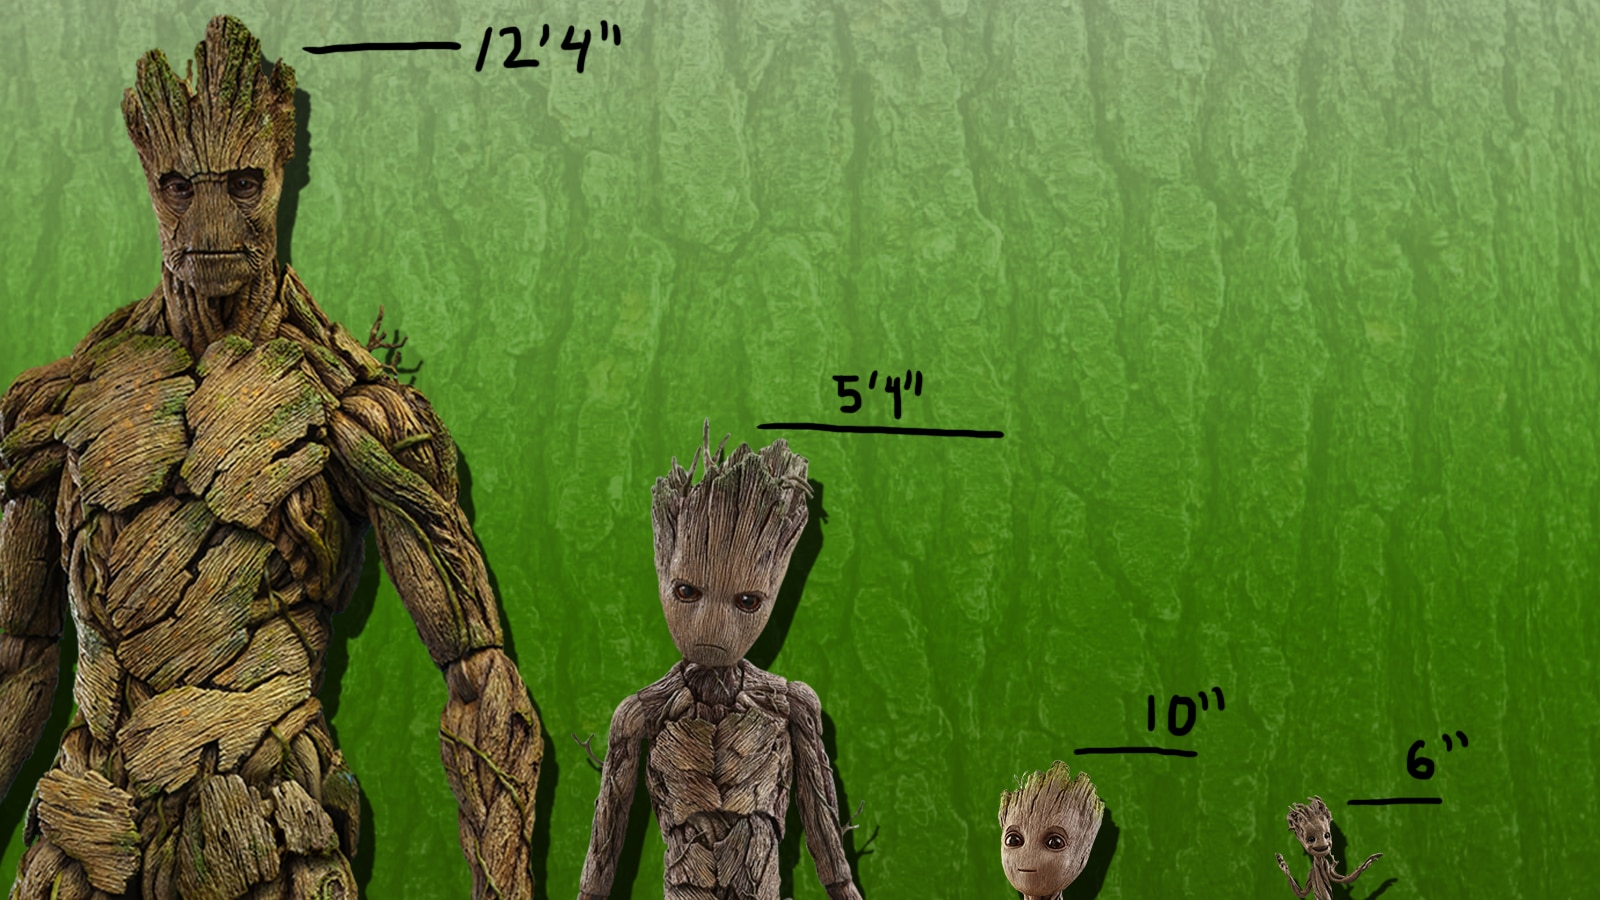 https://www.syfy.com/sites/syfy/files/2019/04/groot_growth_rate.png